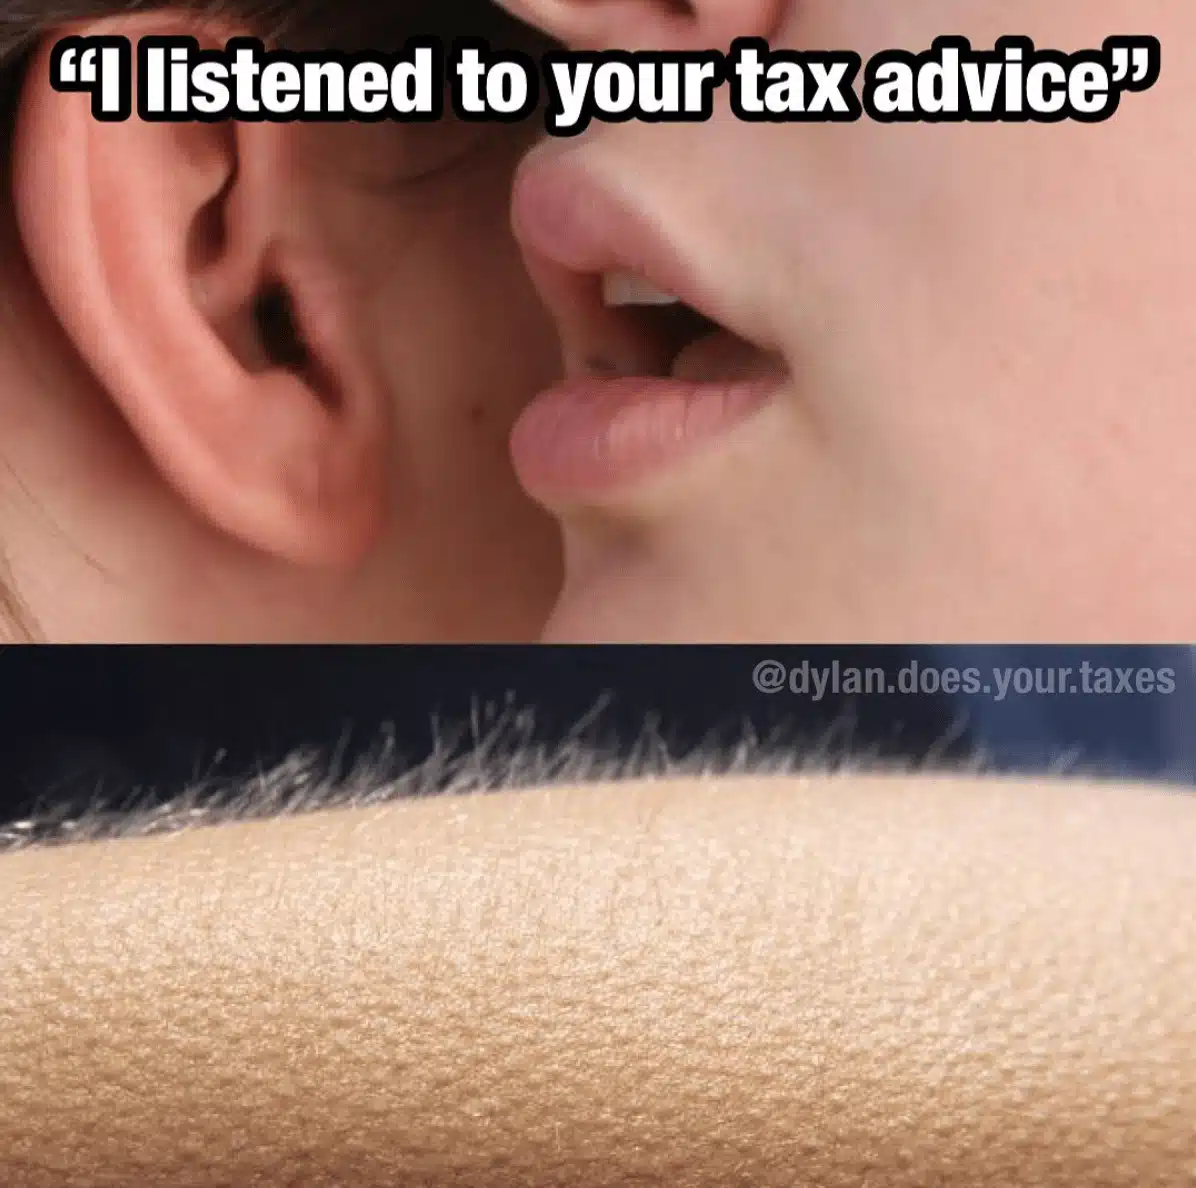 accounting memes - listened to your tax advice